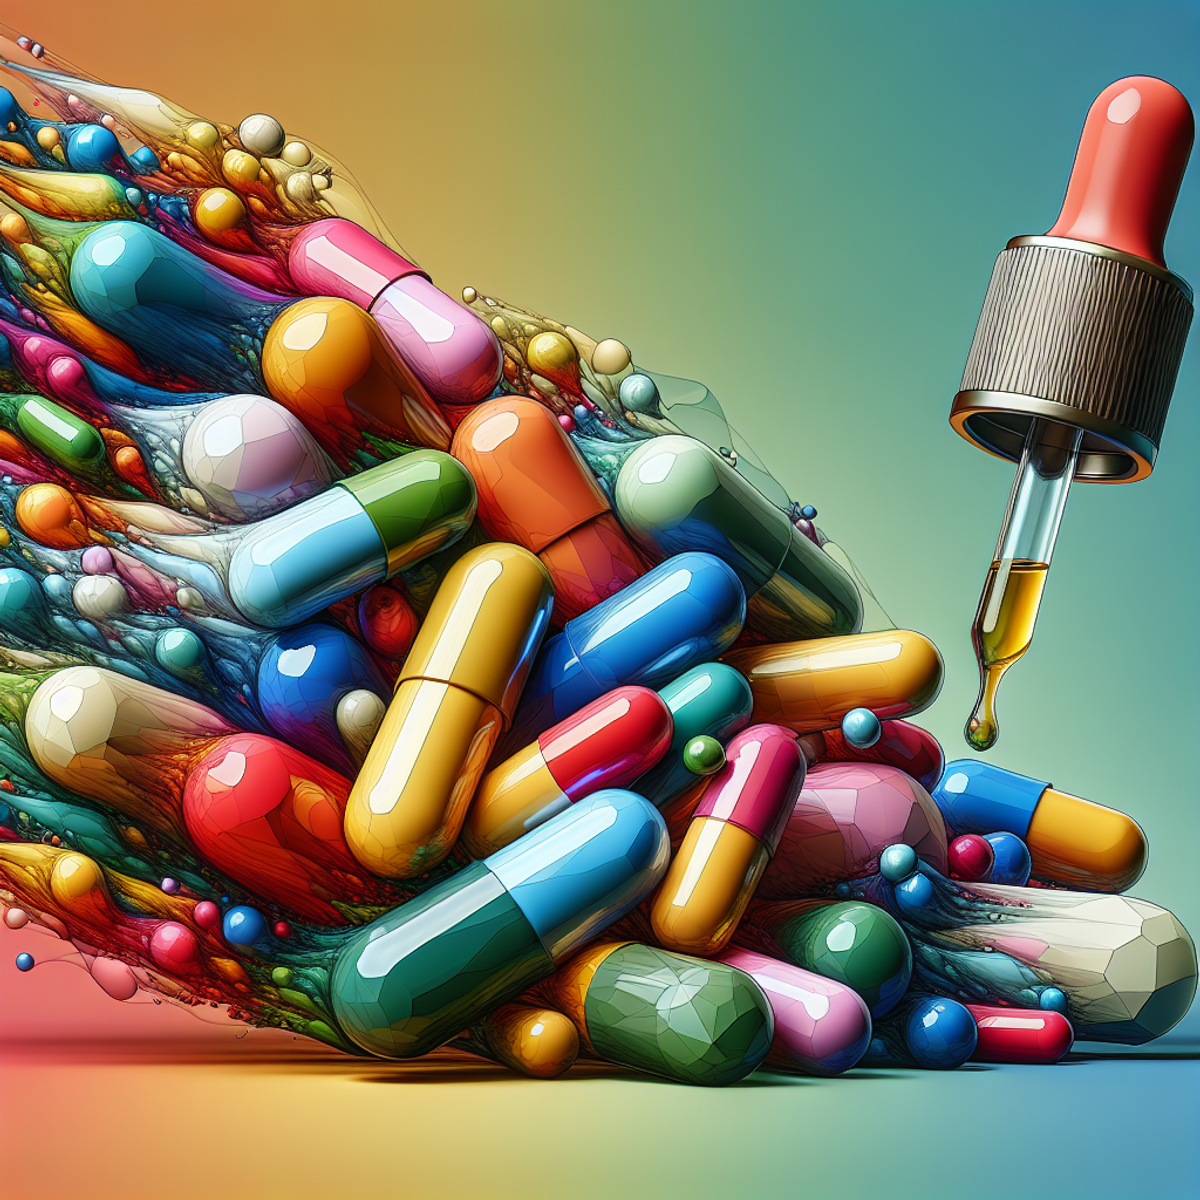 A close-up photo of a dropper filled with blue liquid hovering above a collection of colorful capsules arranged in an abstract pattern.